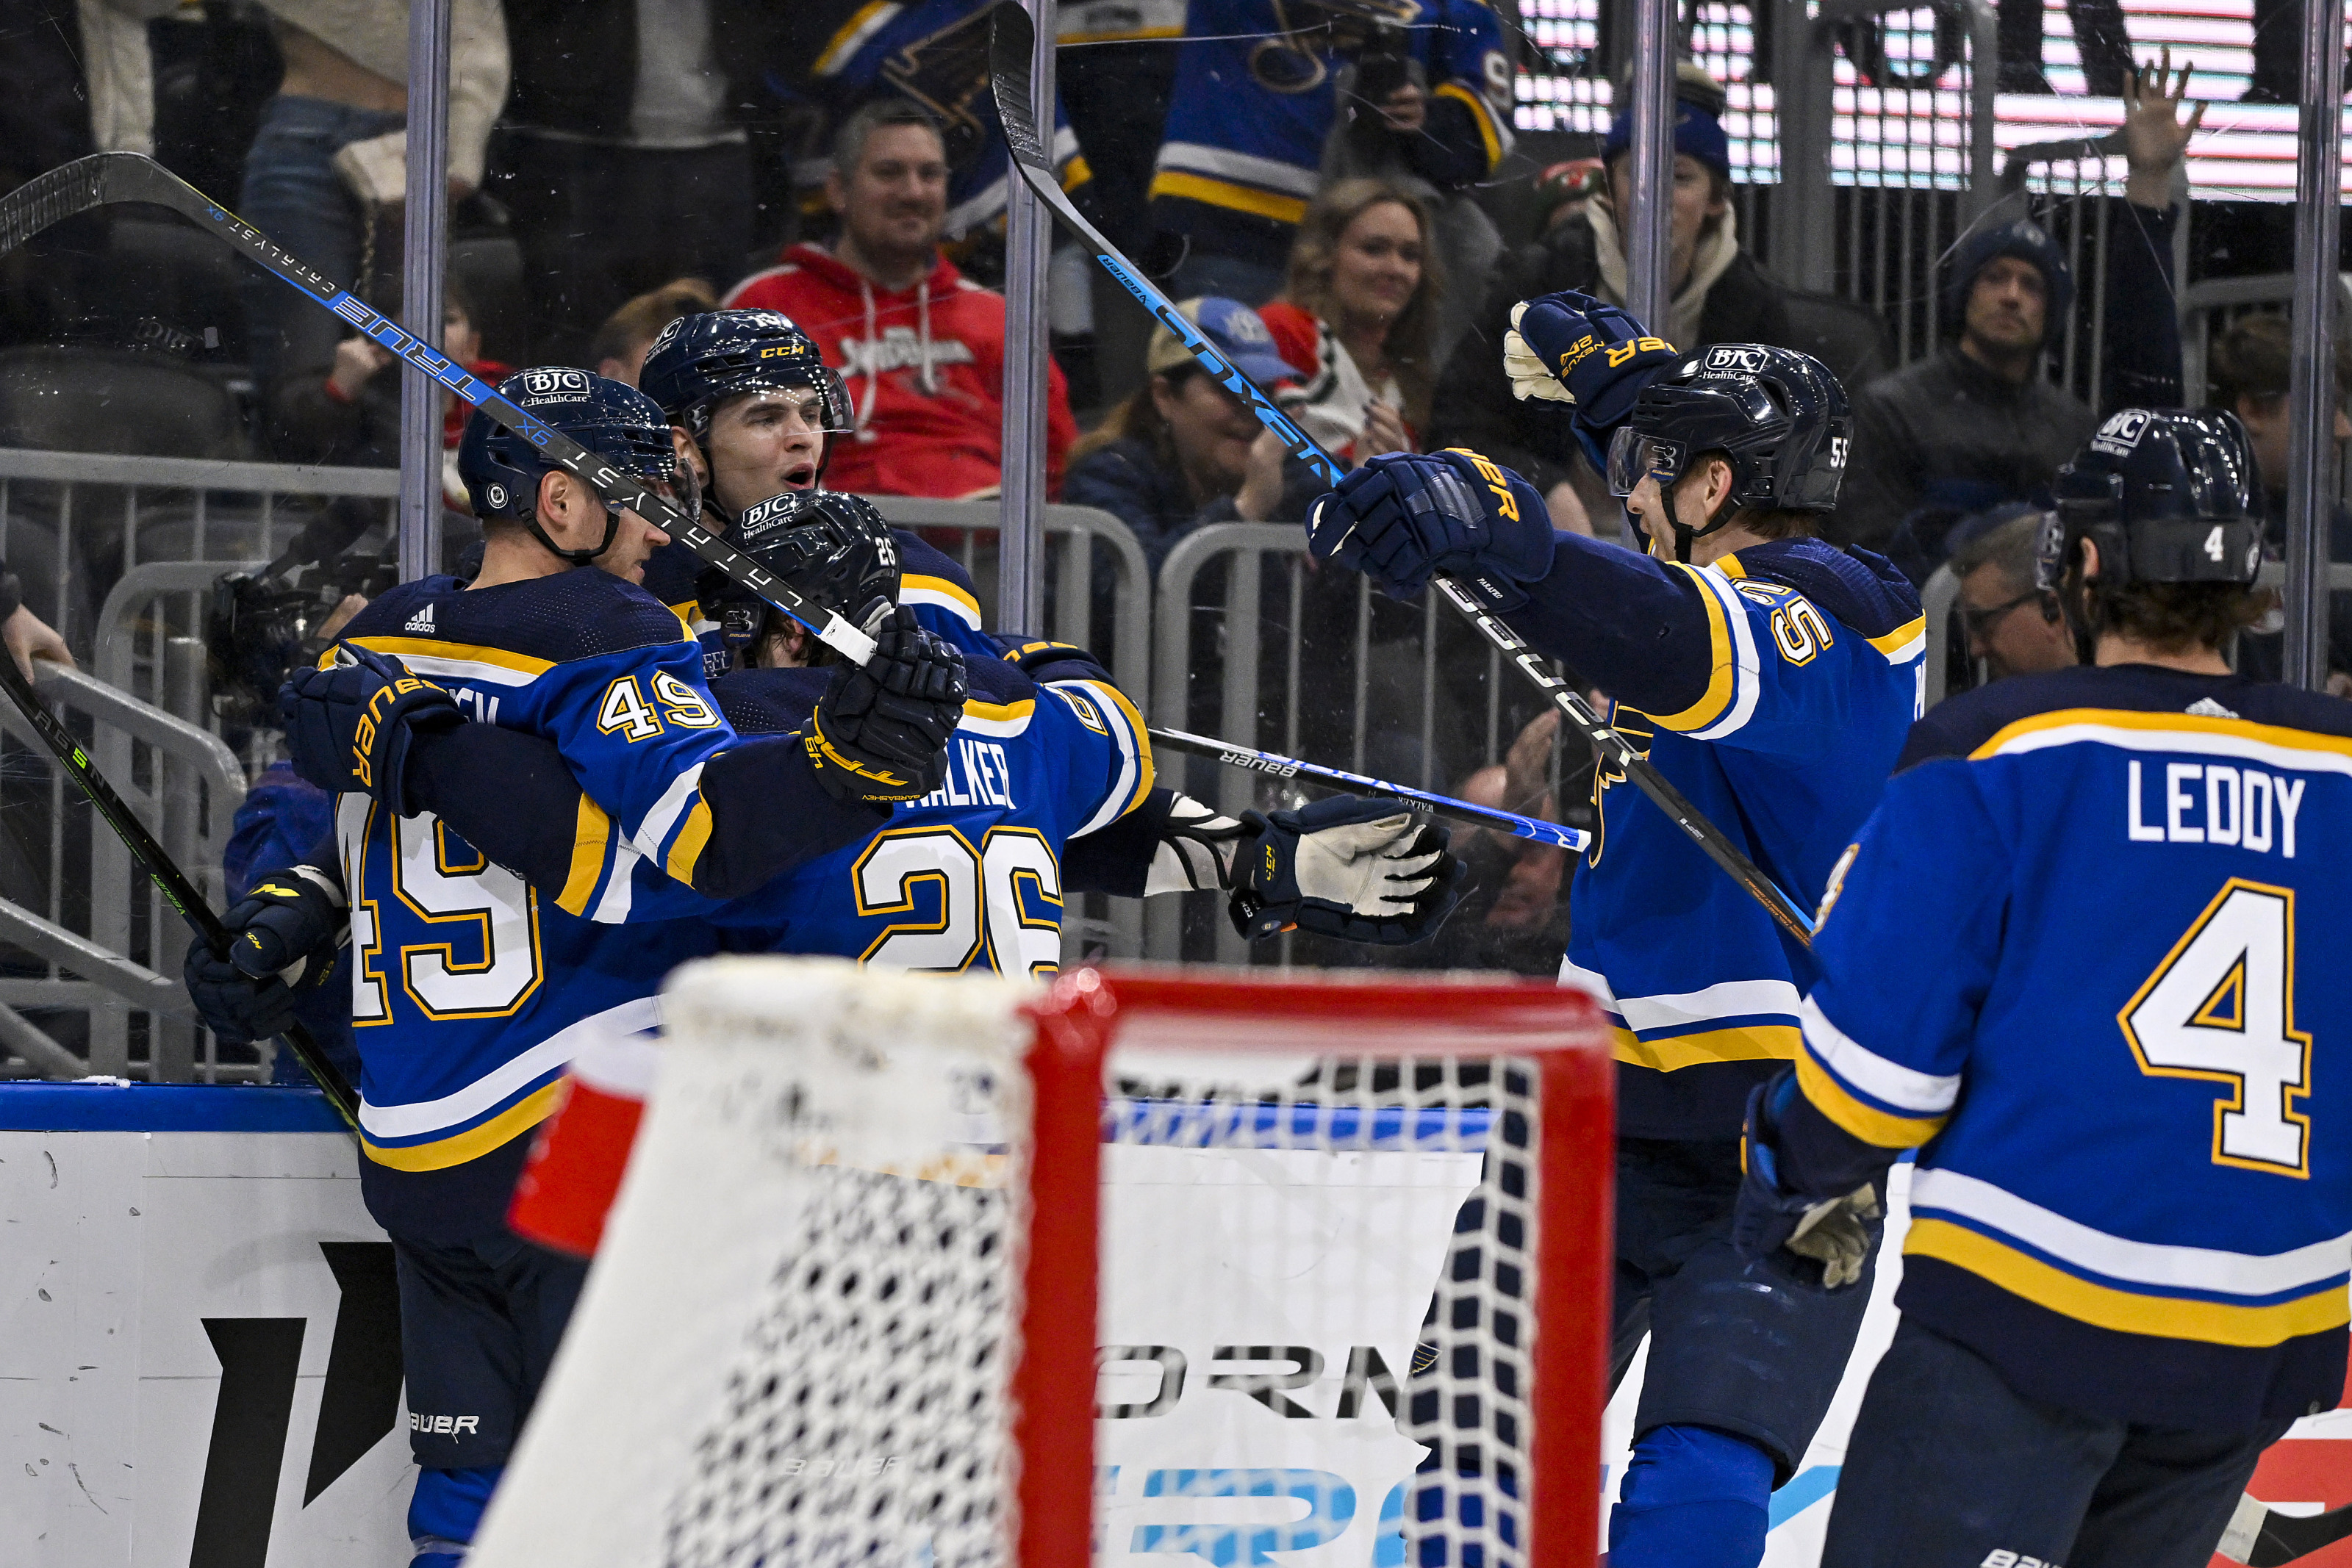 St. Louis Blues on X: GAME-WINNER FROM THE CAPTAIN HIMSELF https